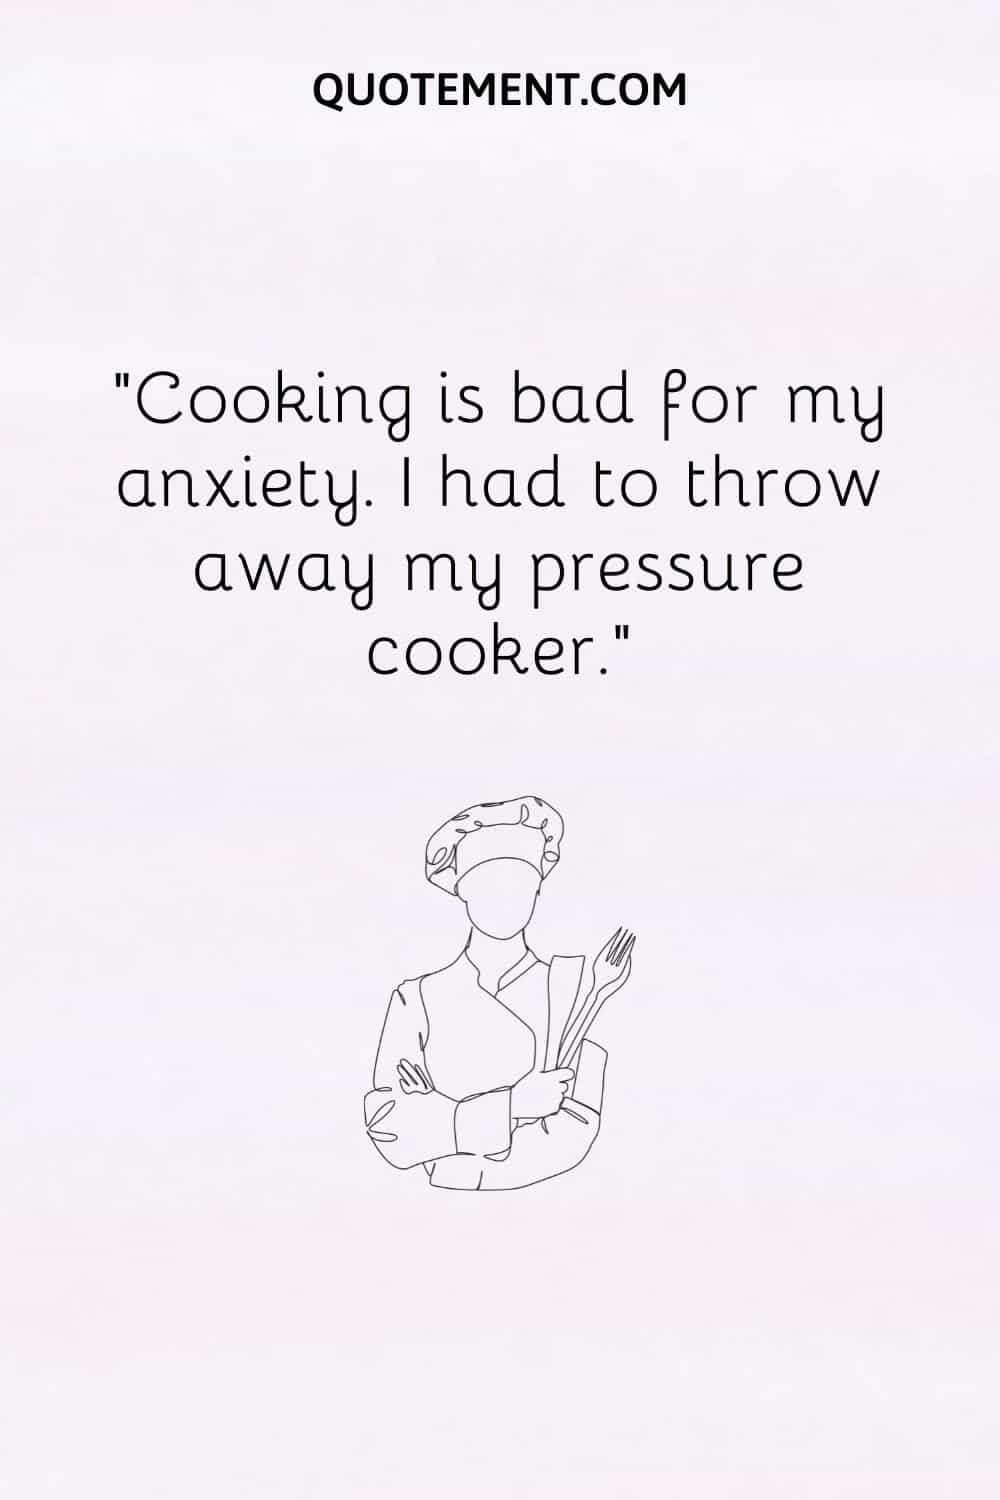 Cooking is bad for my anxiety. I had to throw away my pressure cooker